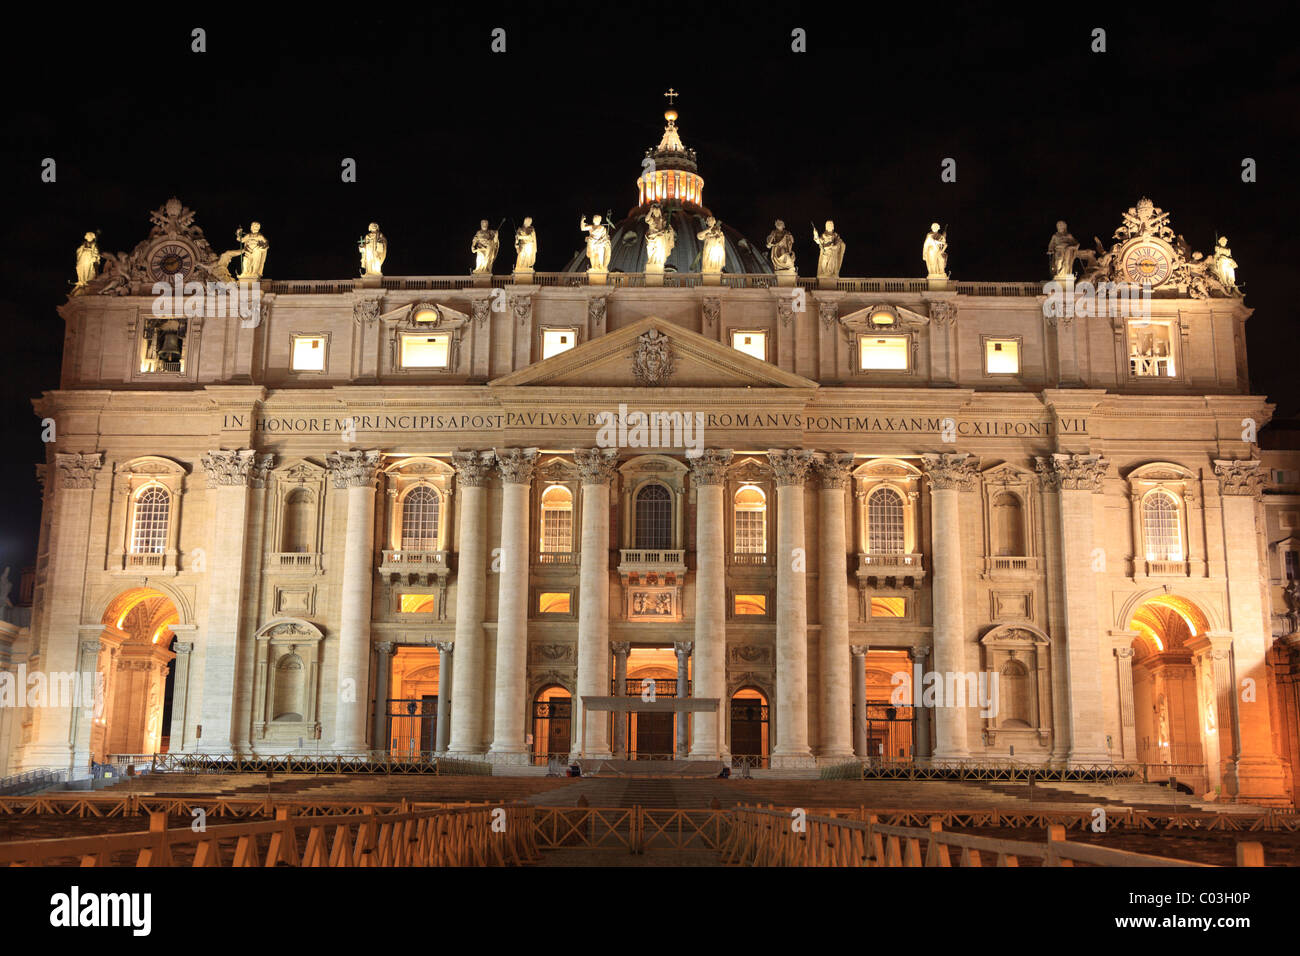 St. Peter's Basilica, St. Peter's Square, Vatican City, Rome, Italy, Europe Stock Photo